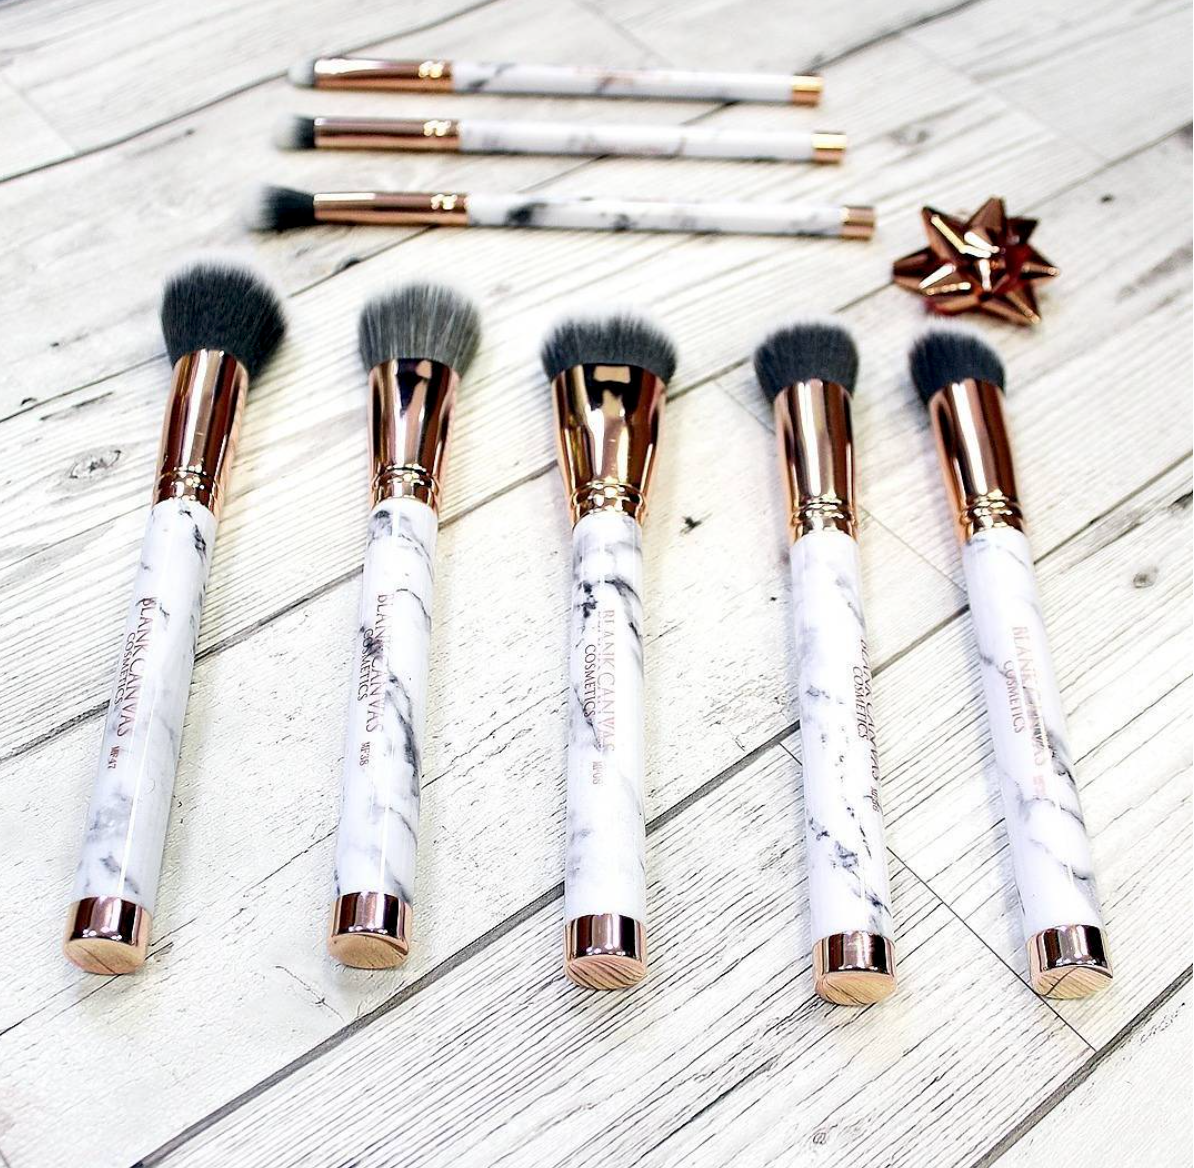 Marble Makeup Brushes